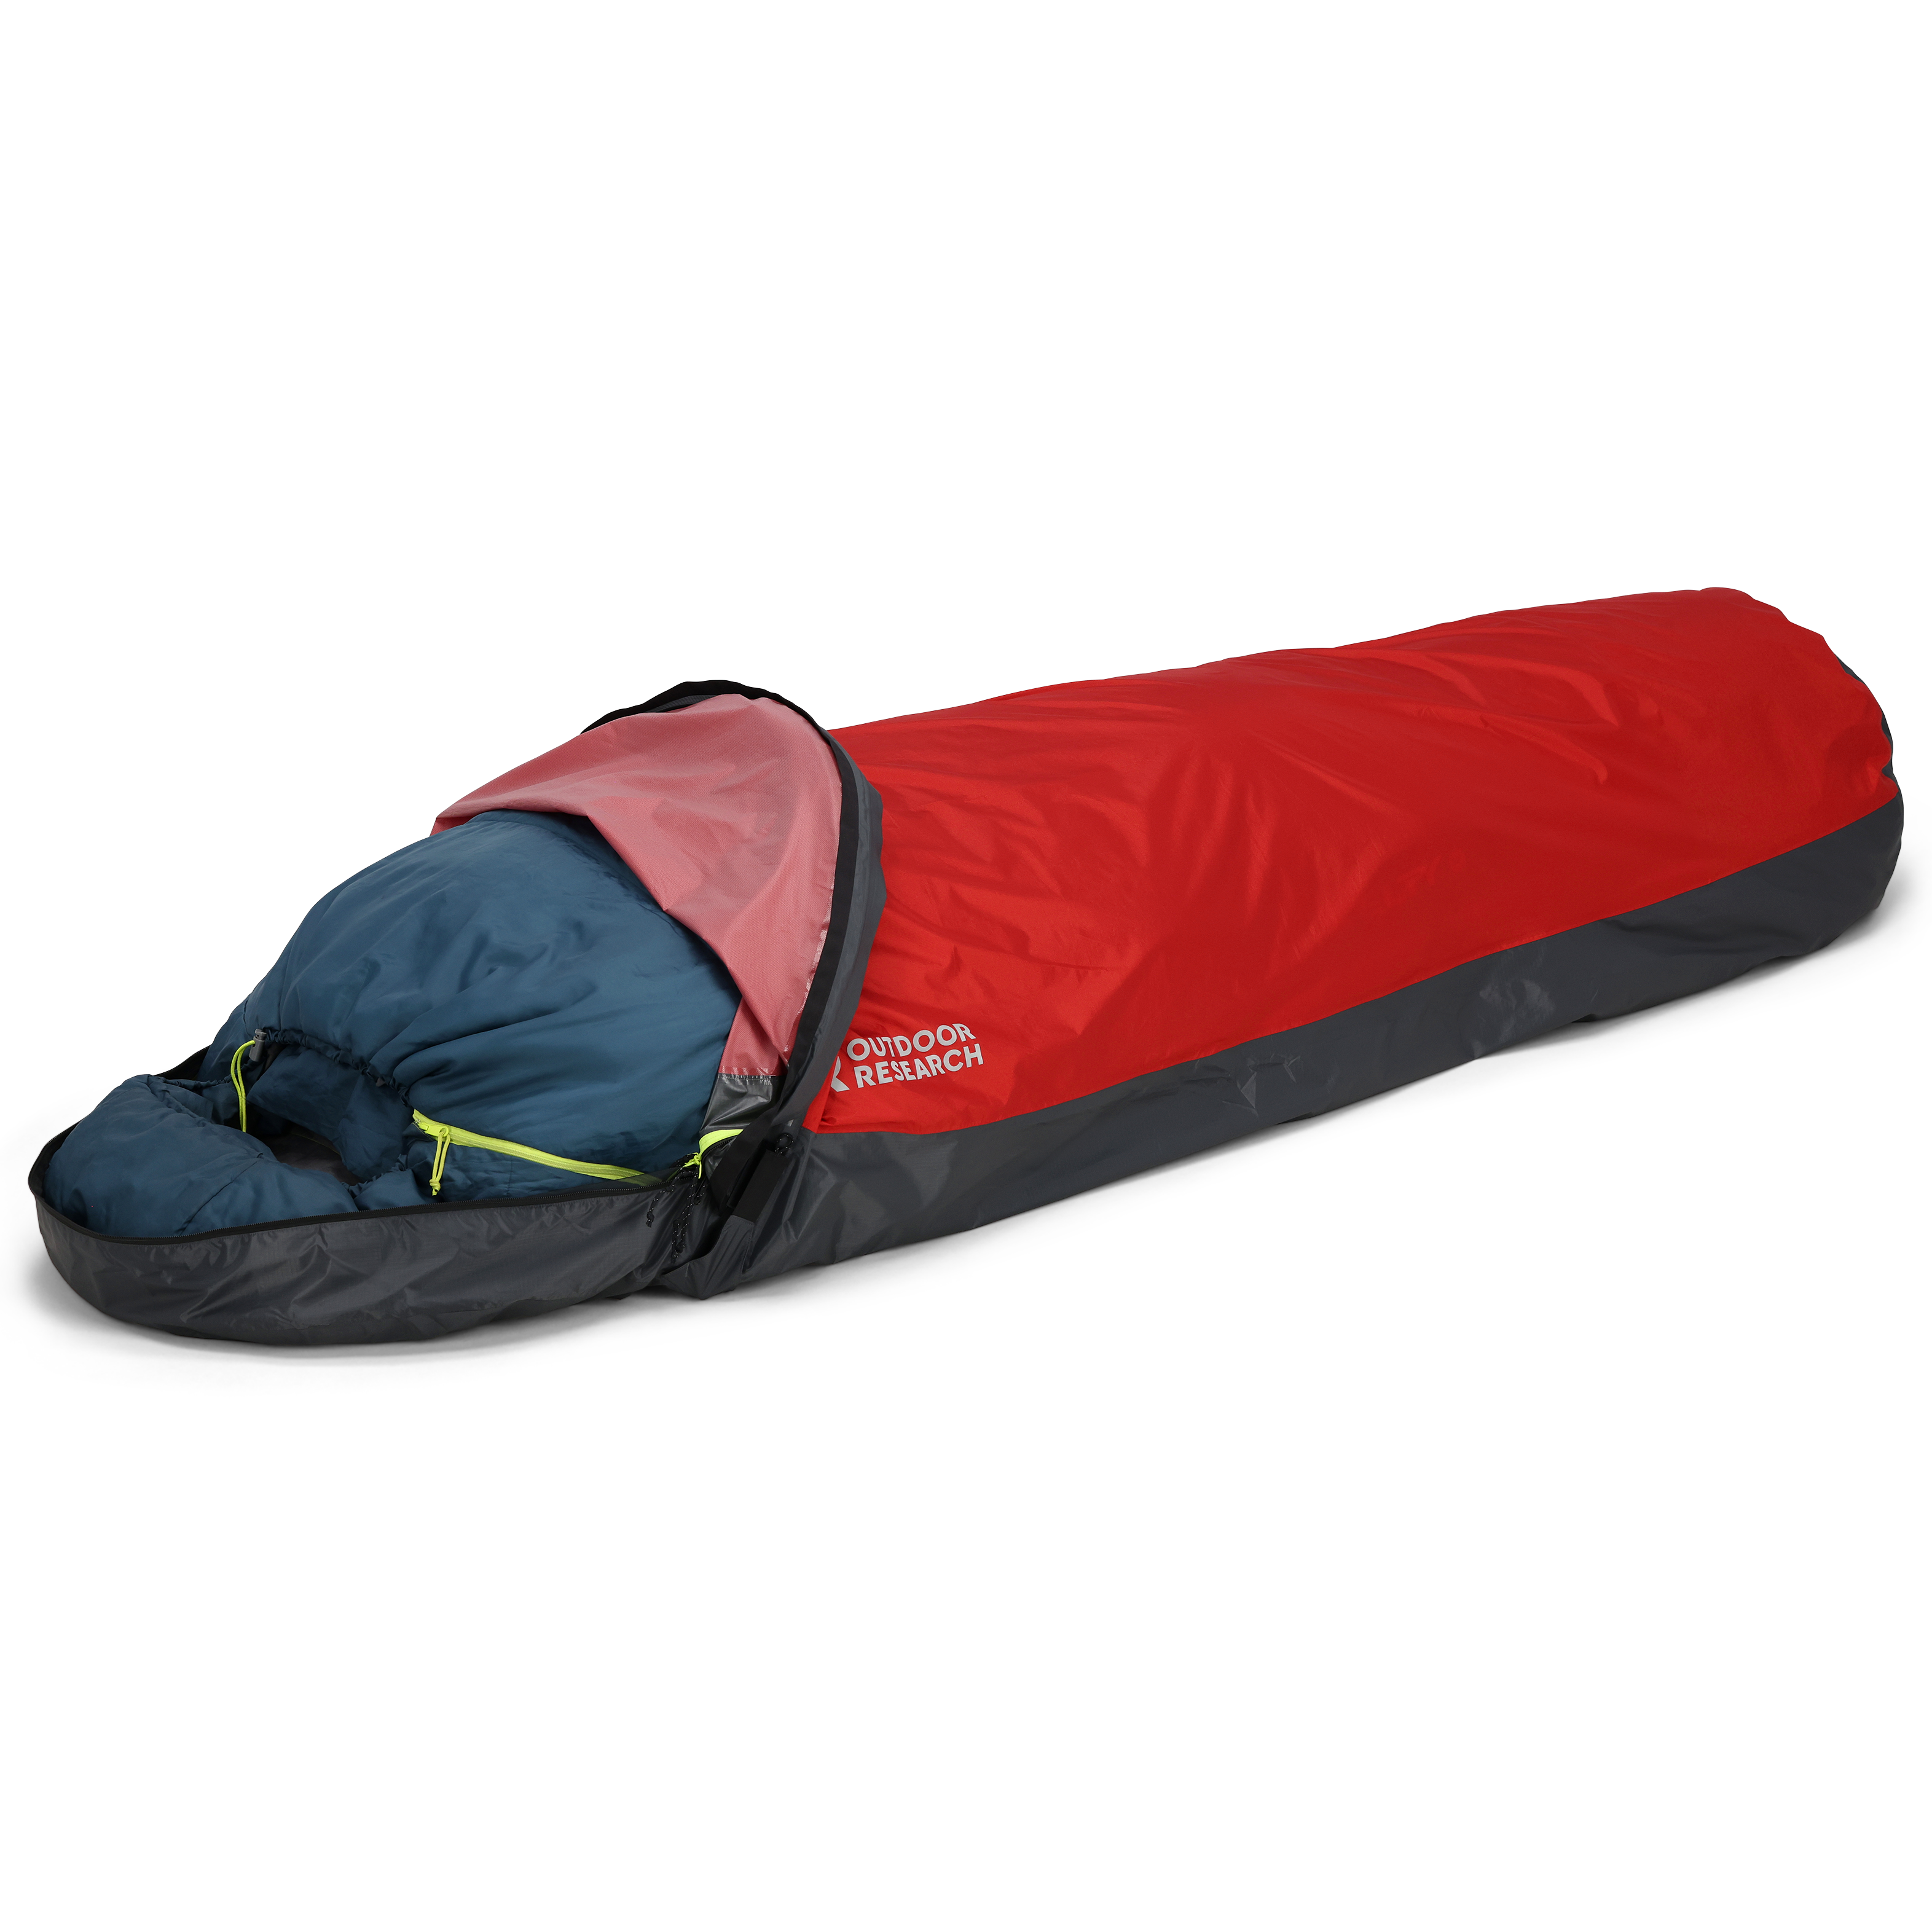 Outdoor Research Helium Bivy - Cranberry